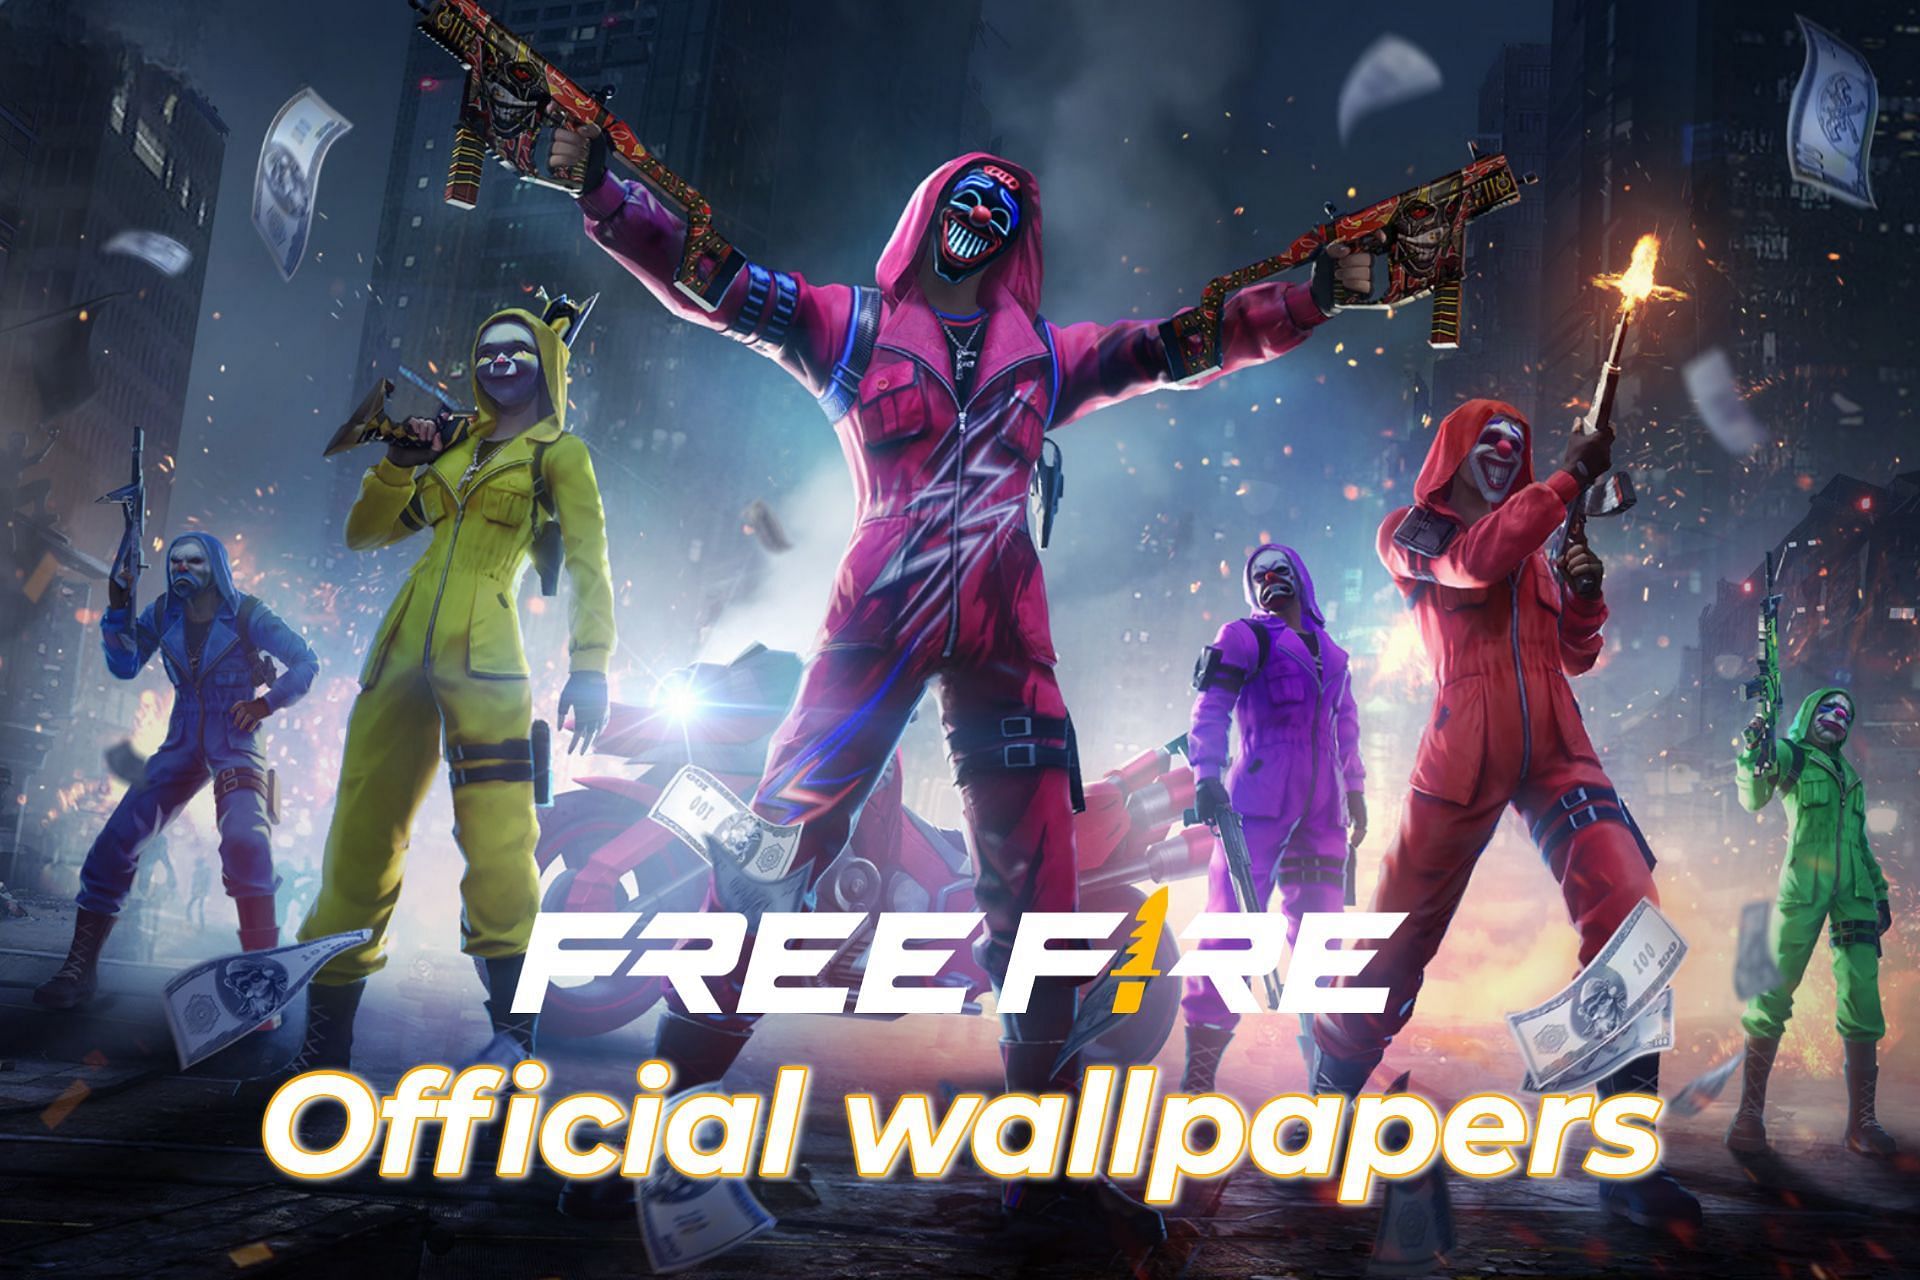 How to download official Free Fire wallpapers in March 2023